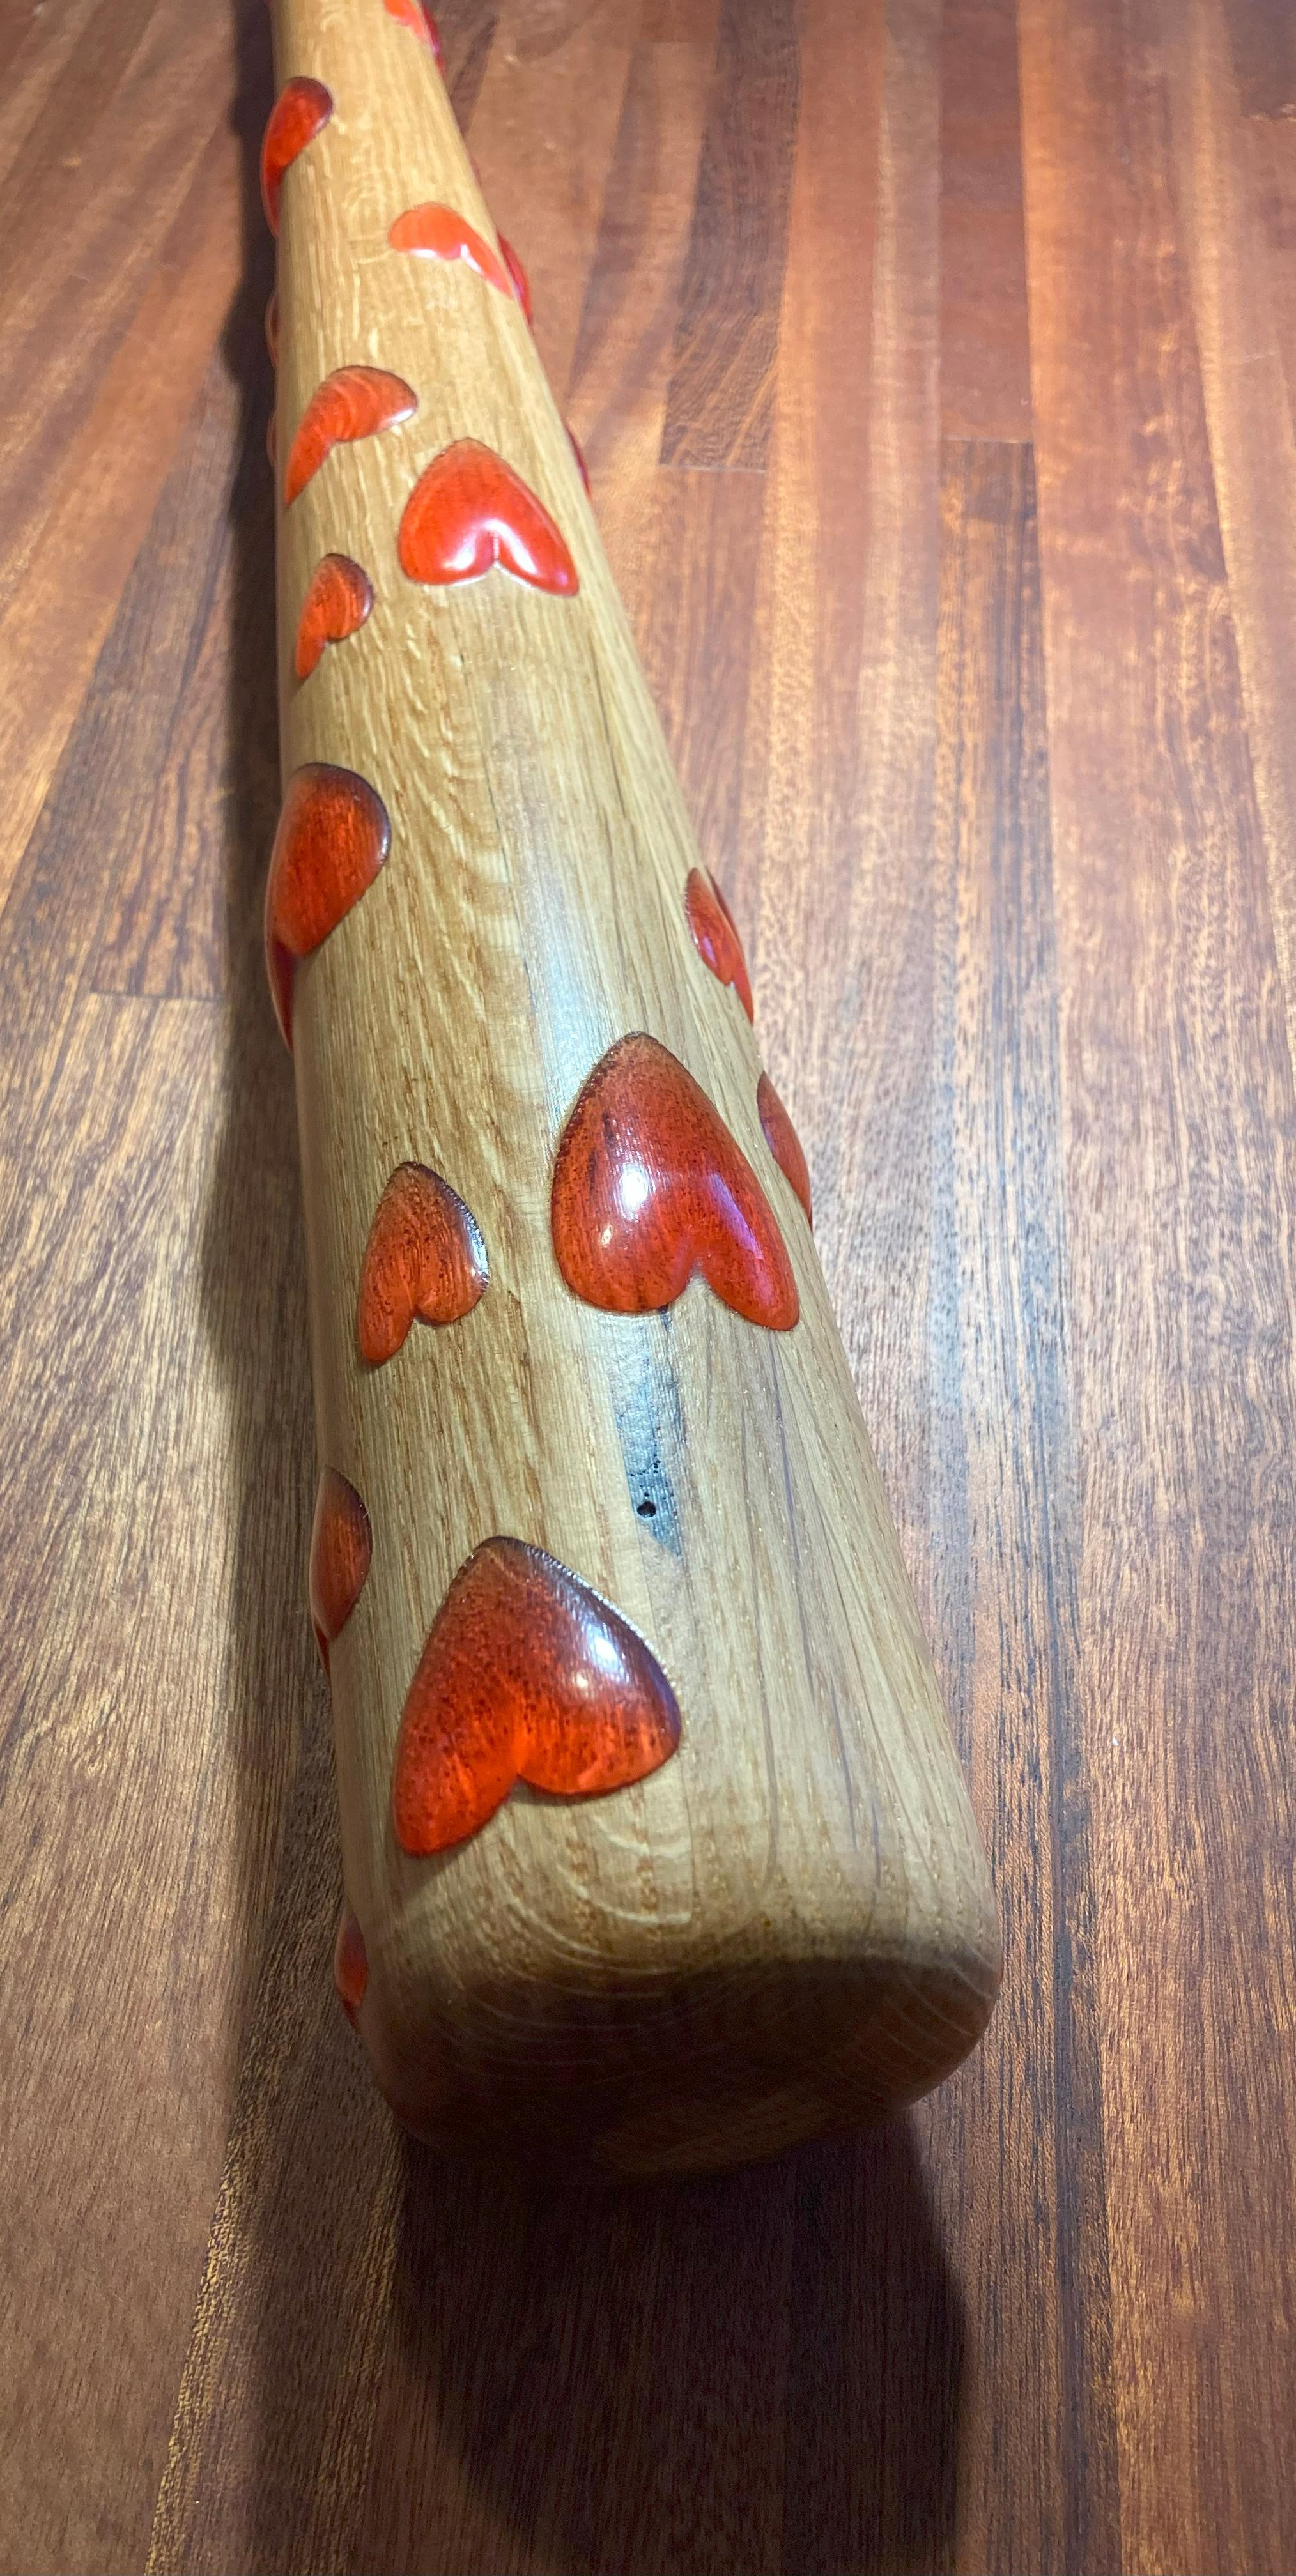 This collectable baseball bat is made from solid oak with red epoxy hearts to express love for an amazing American sport. This American made sport collectable is a top-quality unit by Fletching Interiors of California. It features red epoxy carved